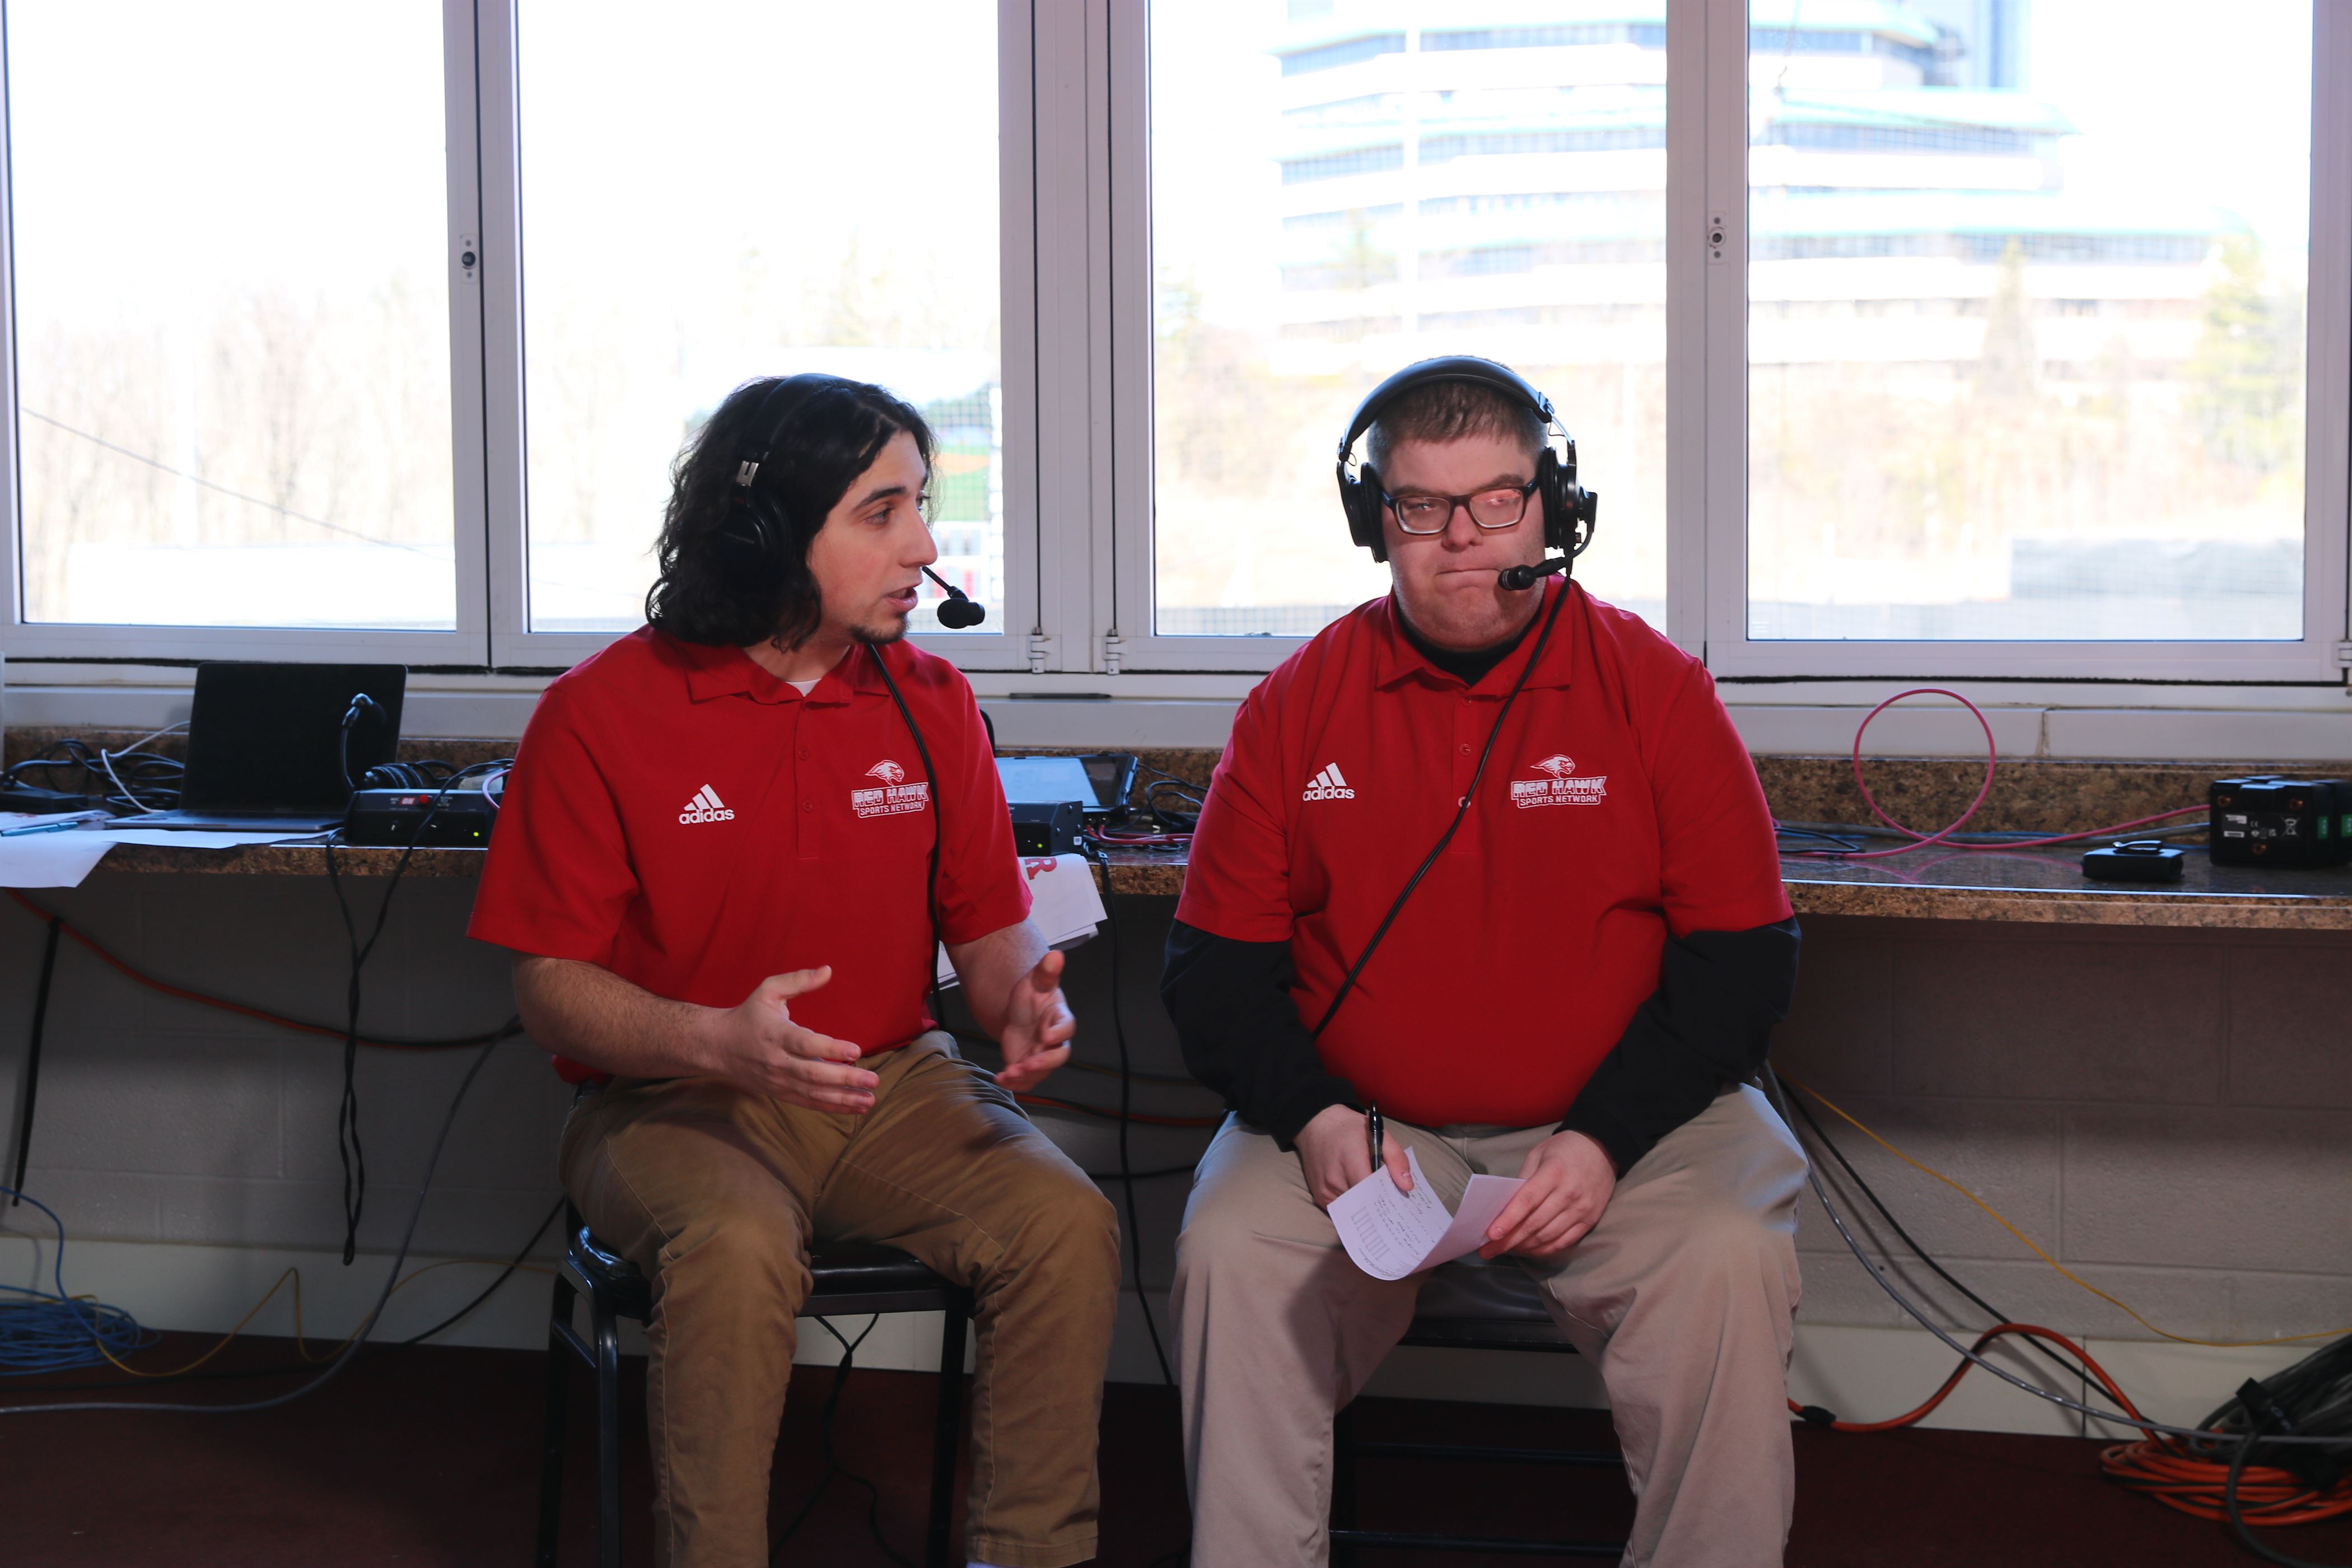 Broadcasters Anthony Cafone and Campbell Donovan report on the game before it starts. Photo courtesy of Maria Barbieri.